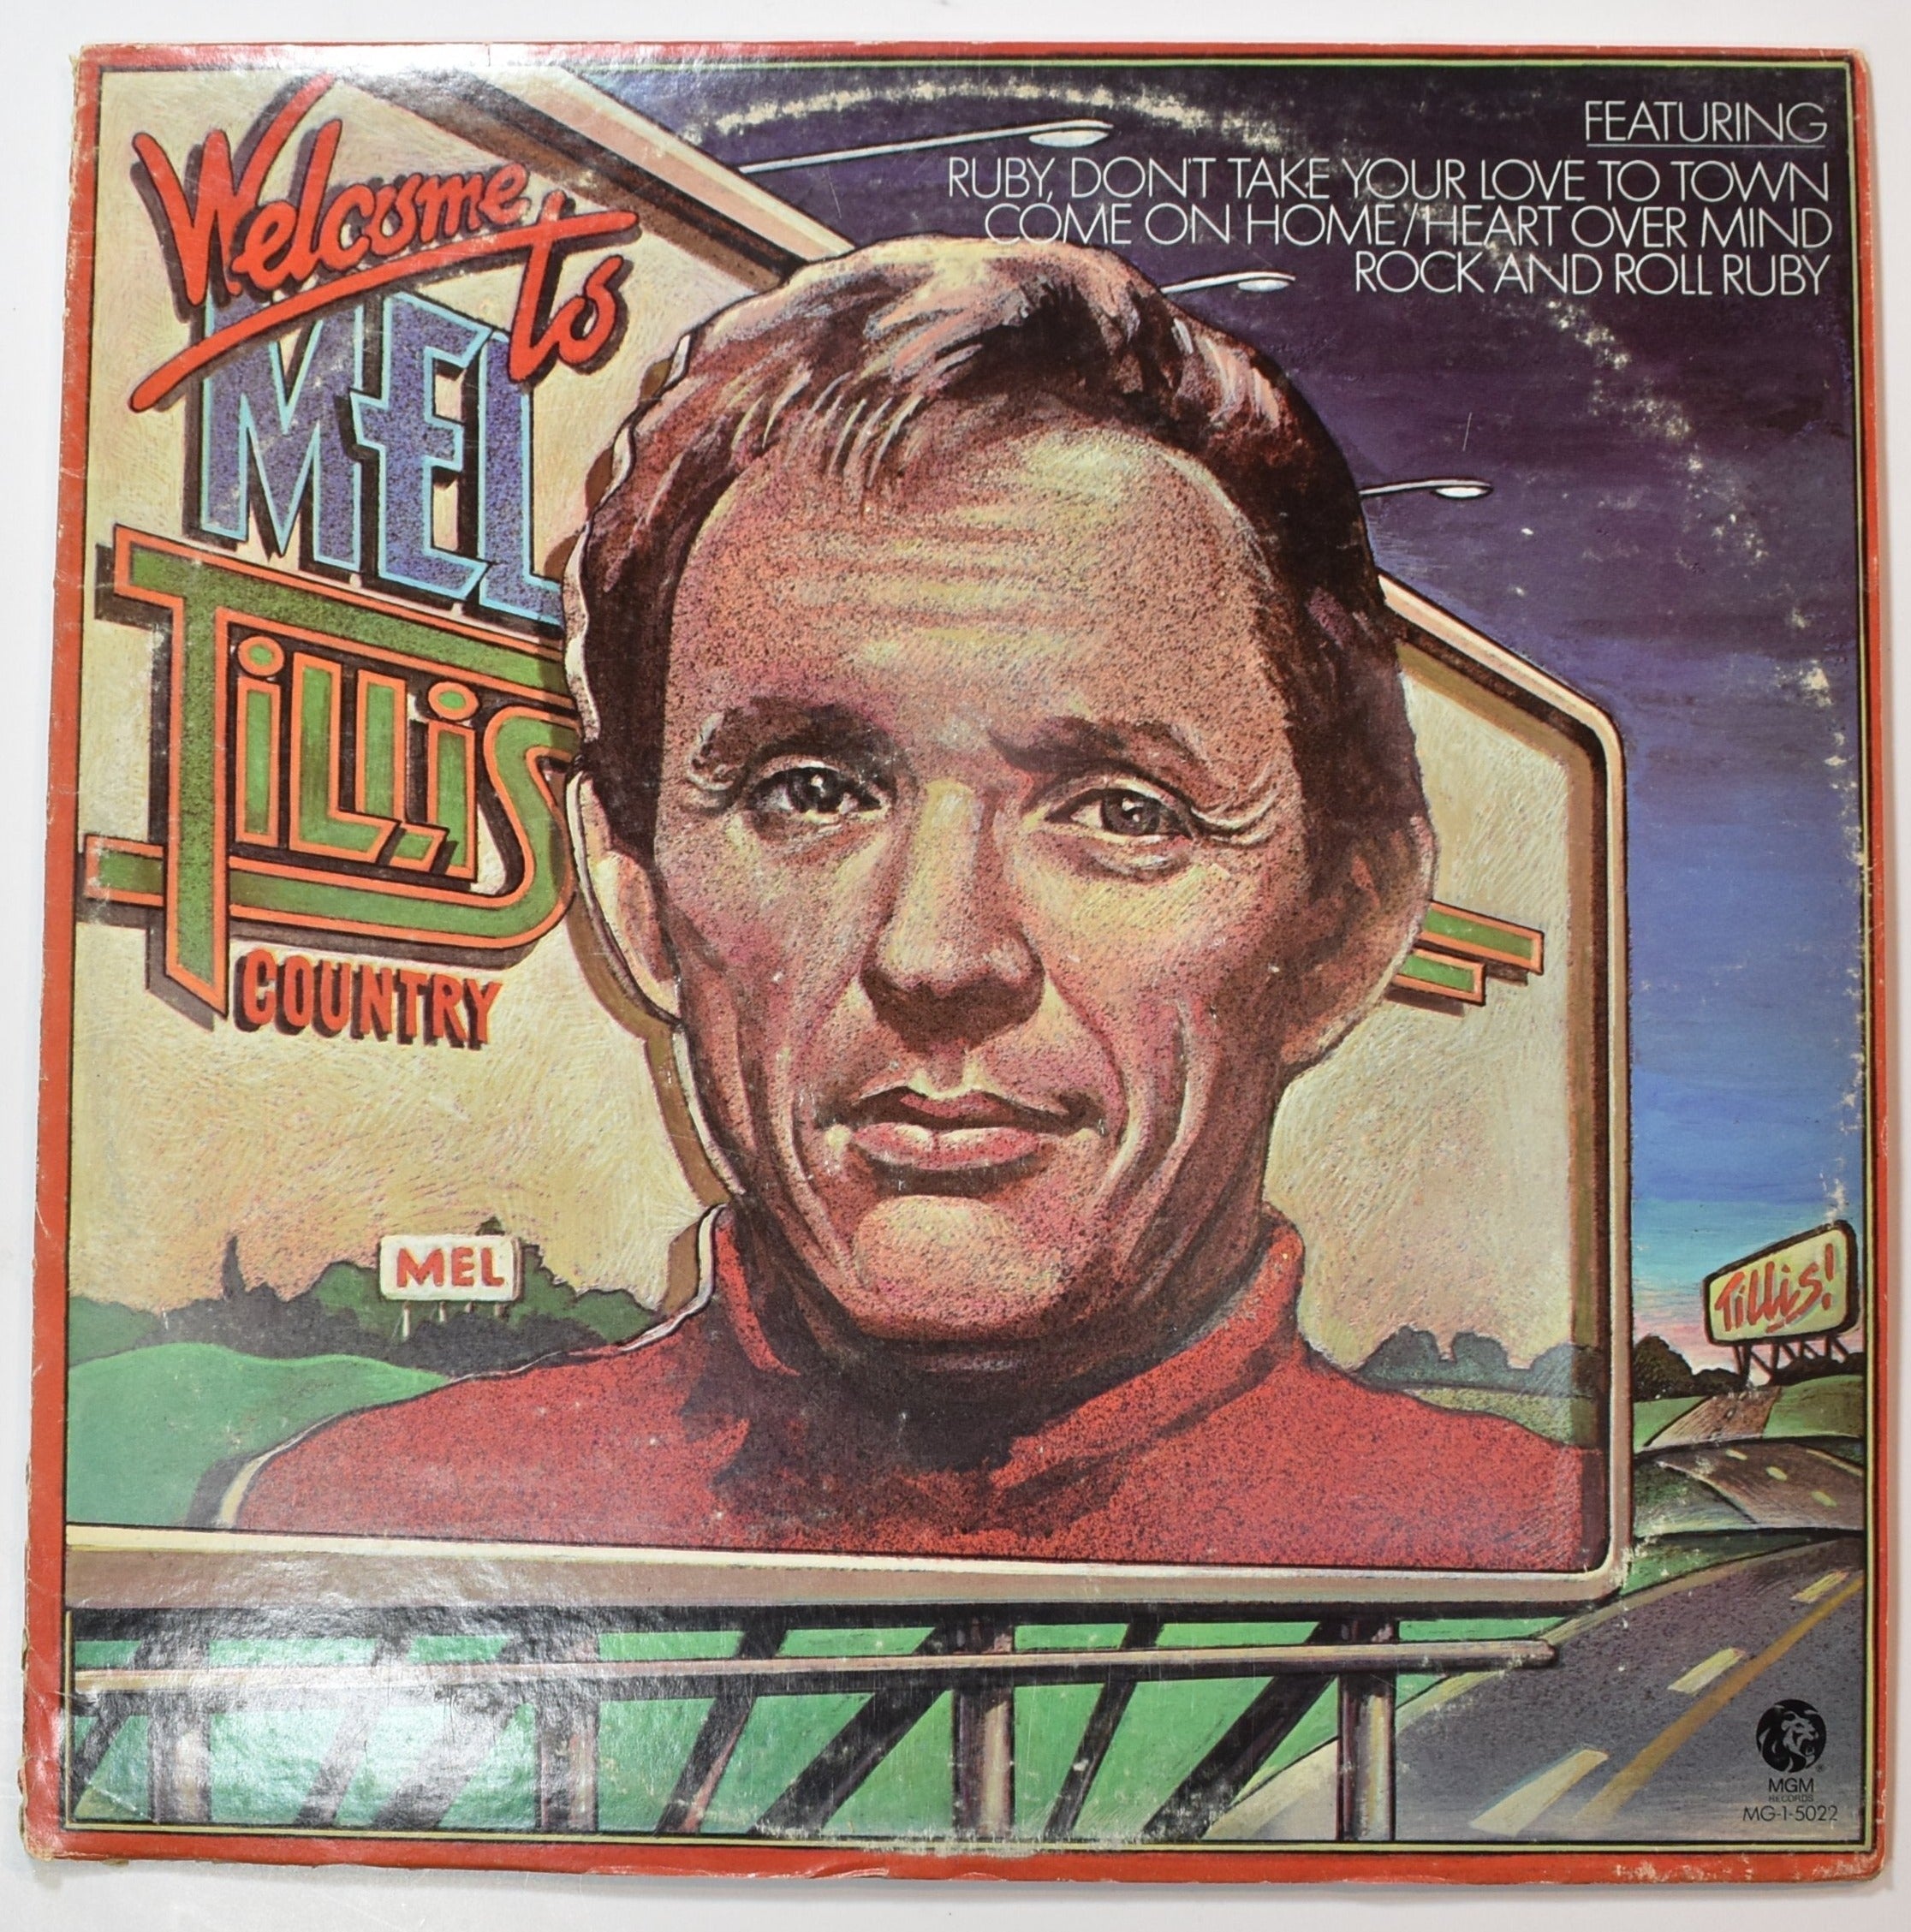 Vinyl Music Record Welcome Mel Tillis Country Used record